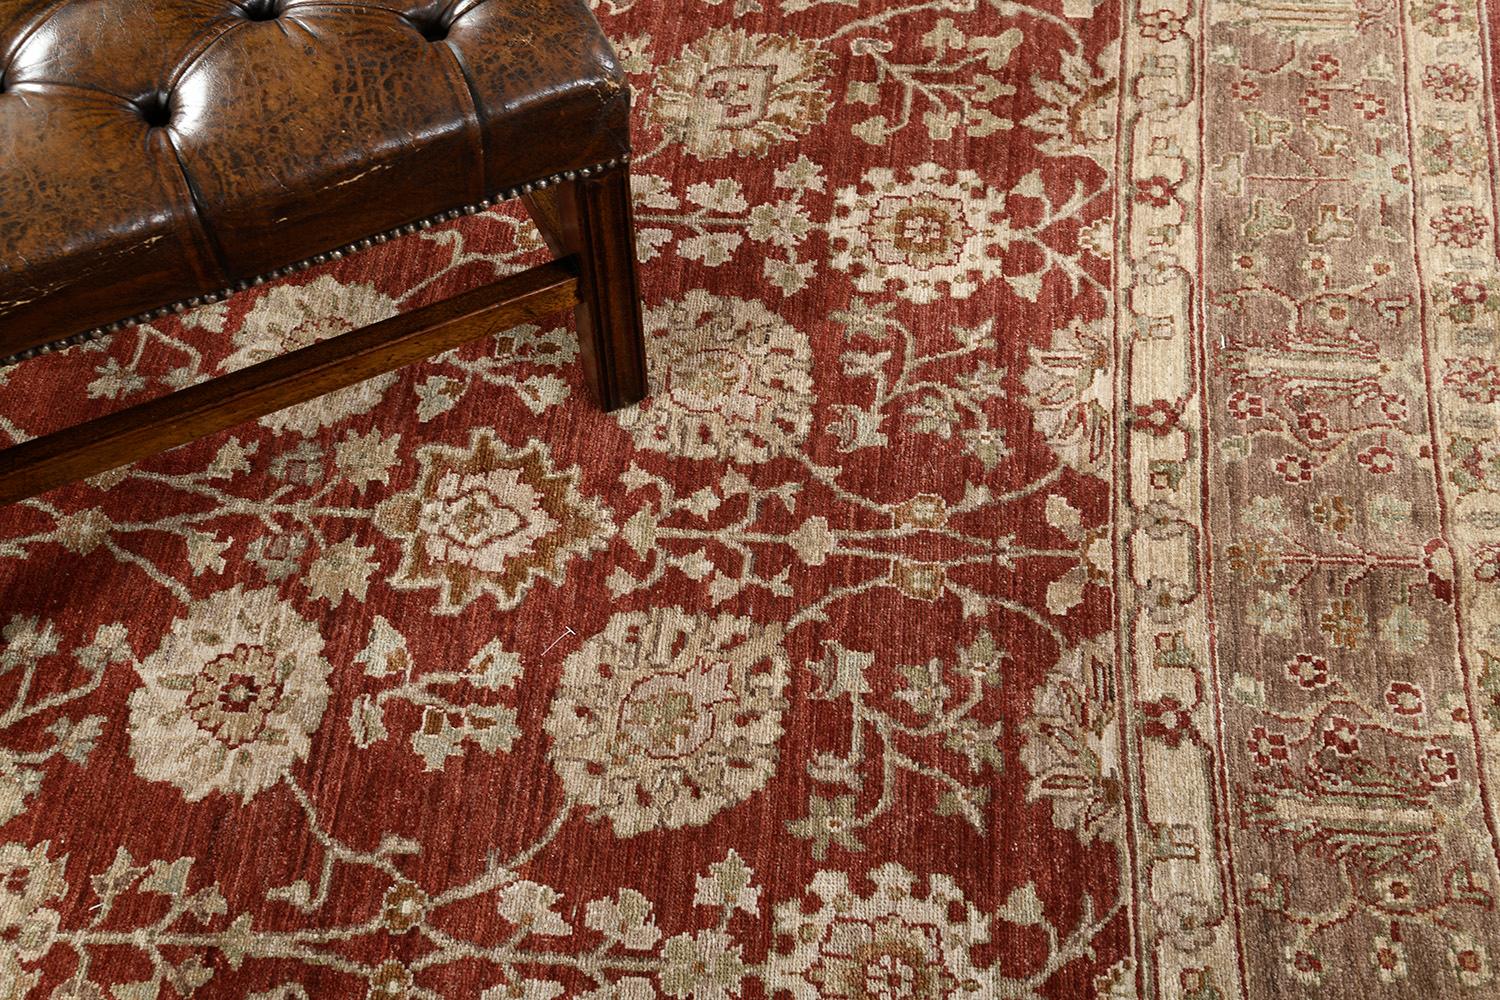 This comprehensive hand-spun wool Tabriz Rug revival features the stunning red and gold schemes that make this suitable for a whole host of applications. Series of embellishments in symmetric design in luxurious gold that matches the pattern and